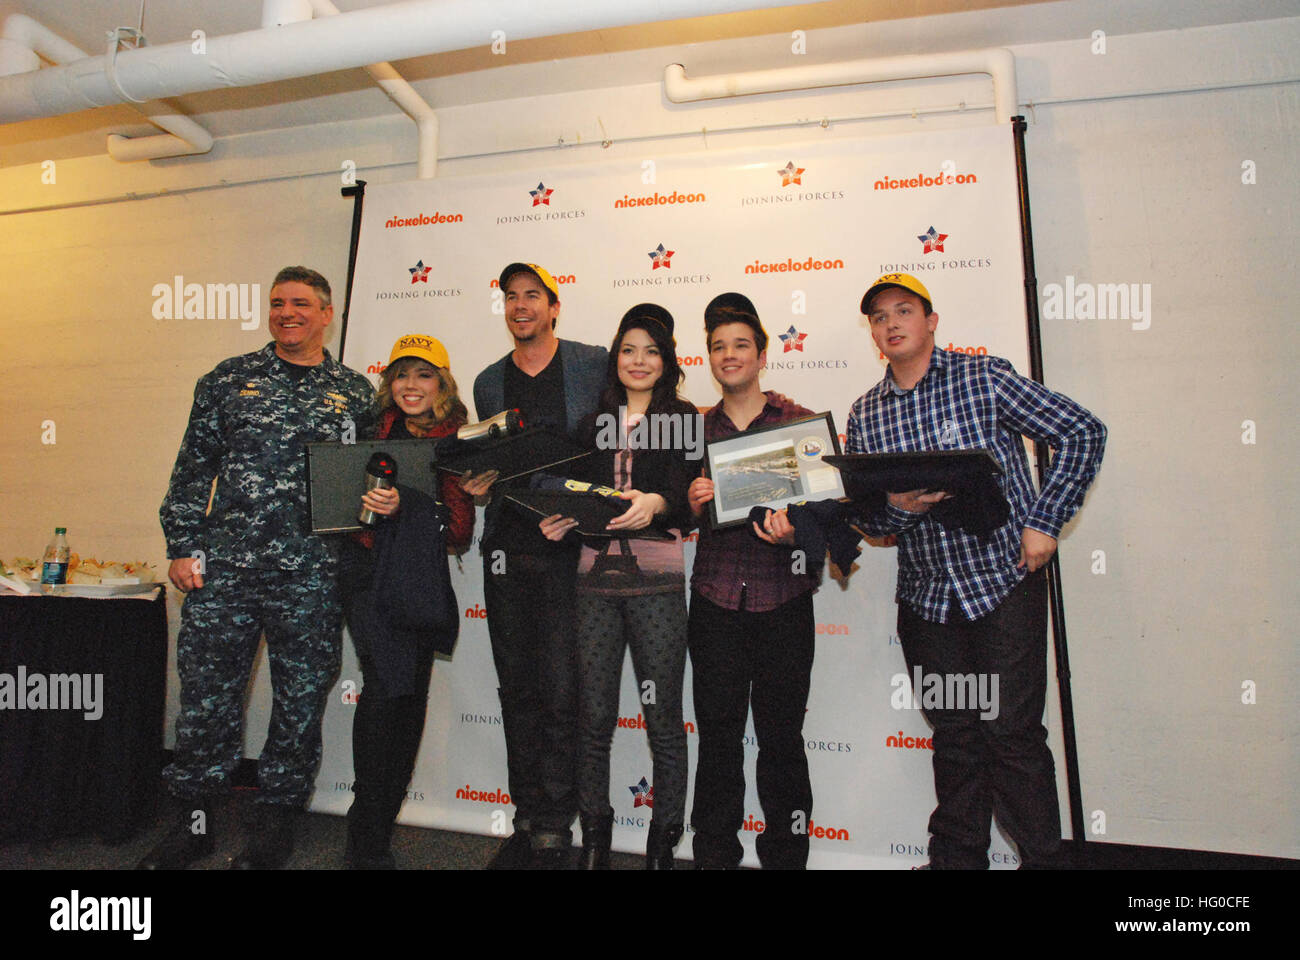 120111-N-OV358-335 GROTON, Conn. (January 11, 2012) Cast members of Nickelodeon's TV show iCarly pose for a photo with Capt. Marc W. Denno, commanding officer of Naval Submarine Base New London, following the episode premiere at the base theater. The cast visited the base to show a special screening of an episode focusing on military family support. (U.S. Navy photo by Mass Communication Specialist 1st class Peter D. Blair/Released) US Navy 120111-N-OV358-335 Cast members of Nickelodeon's TV show iCarly pose for a photo with Capt. Marc W. Denno Stock Photo